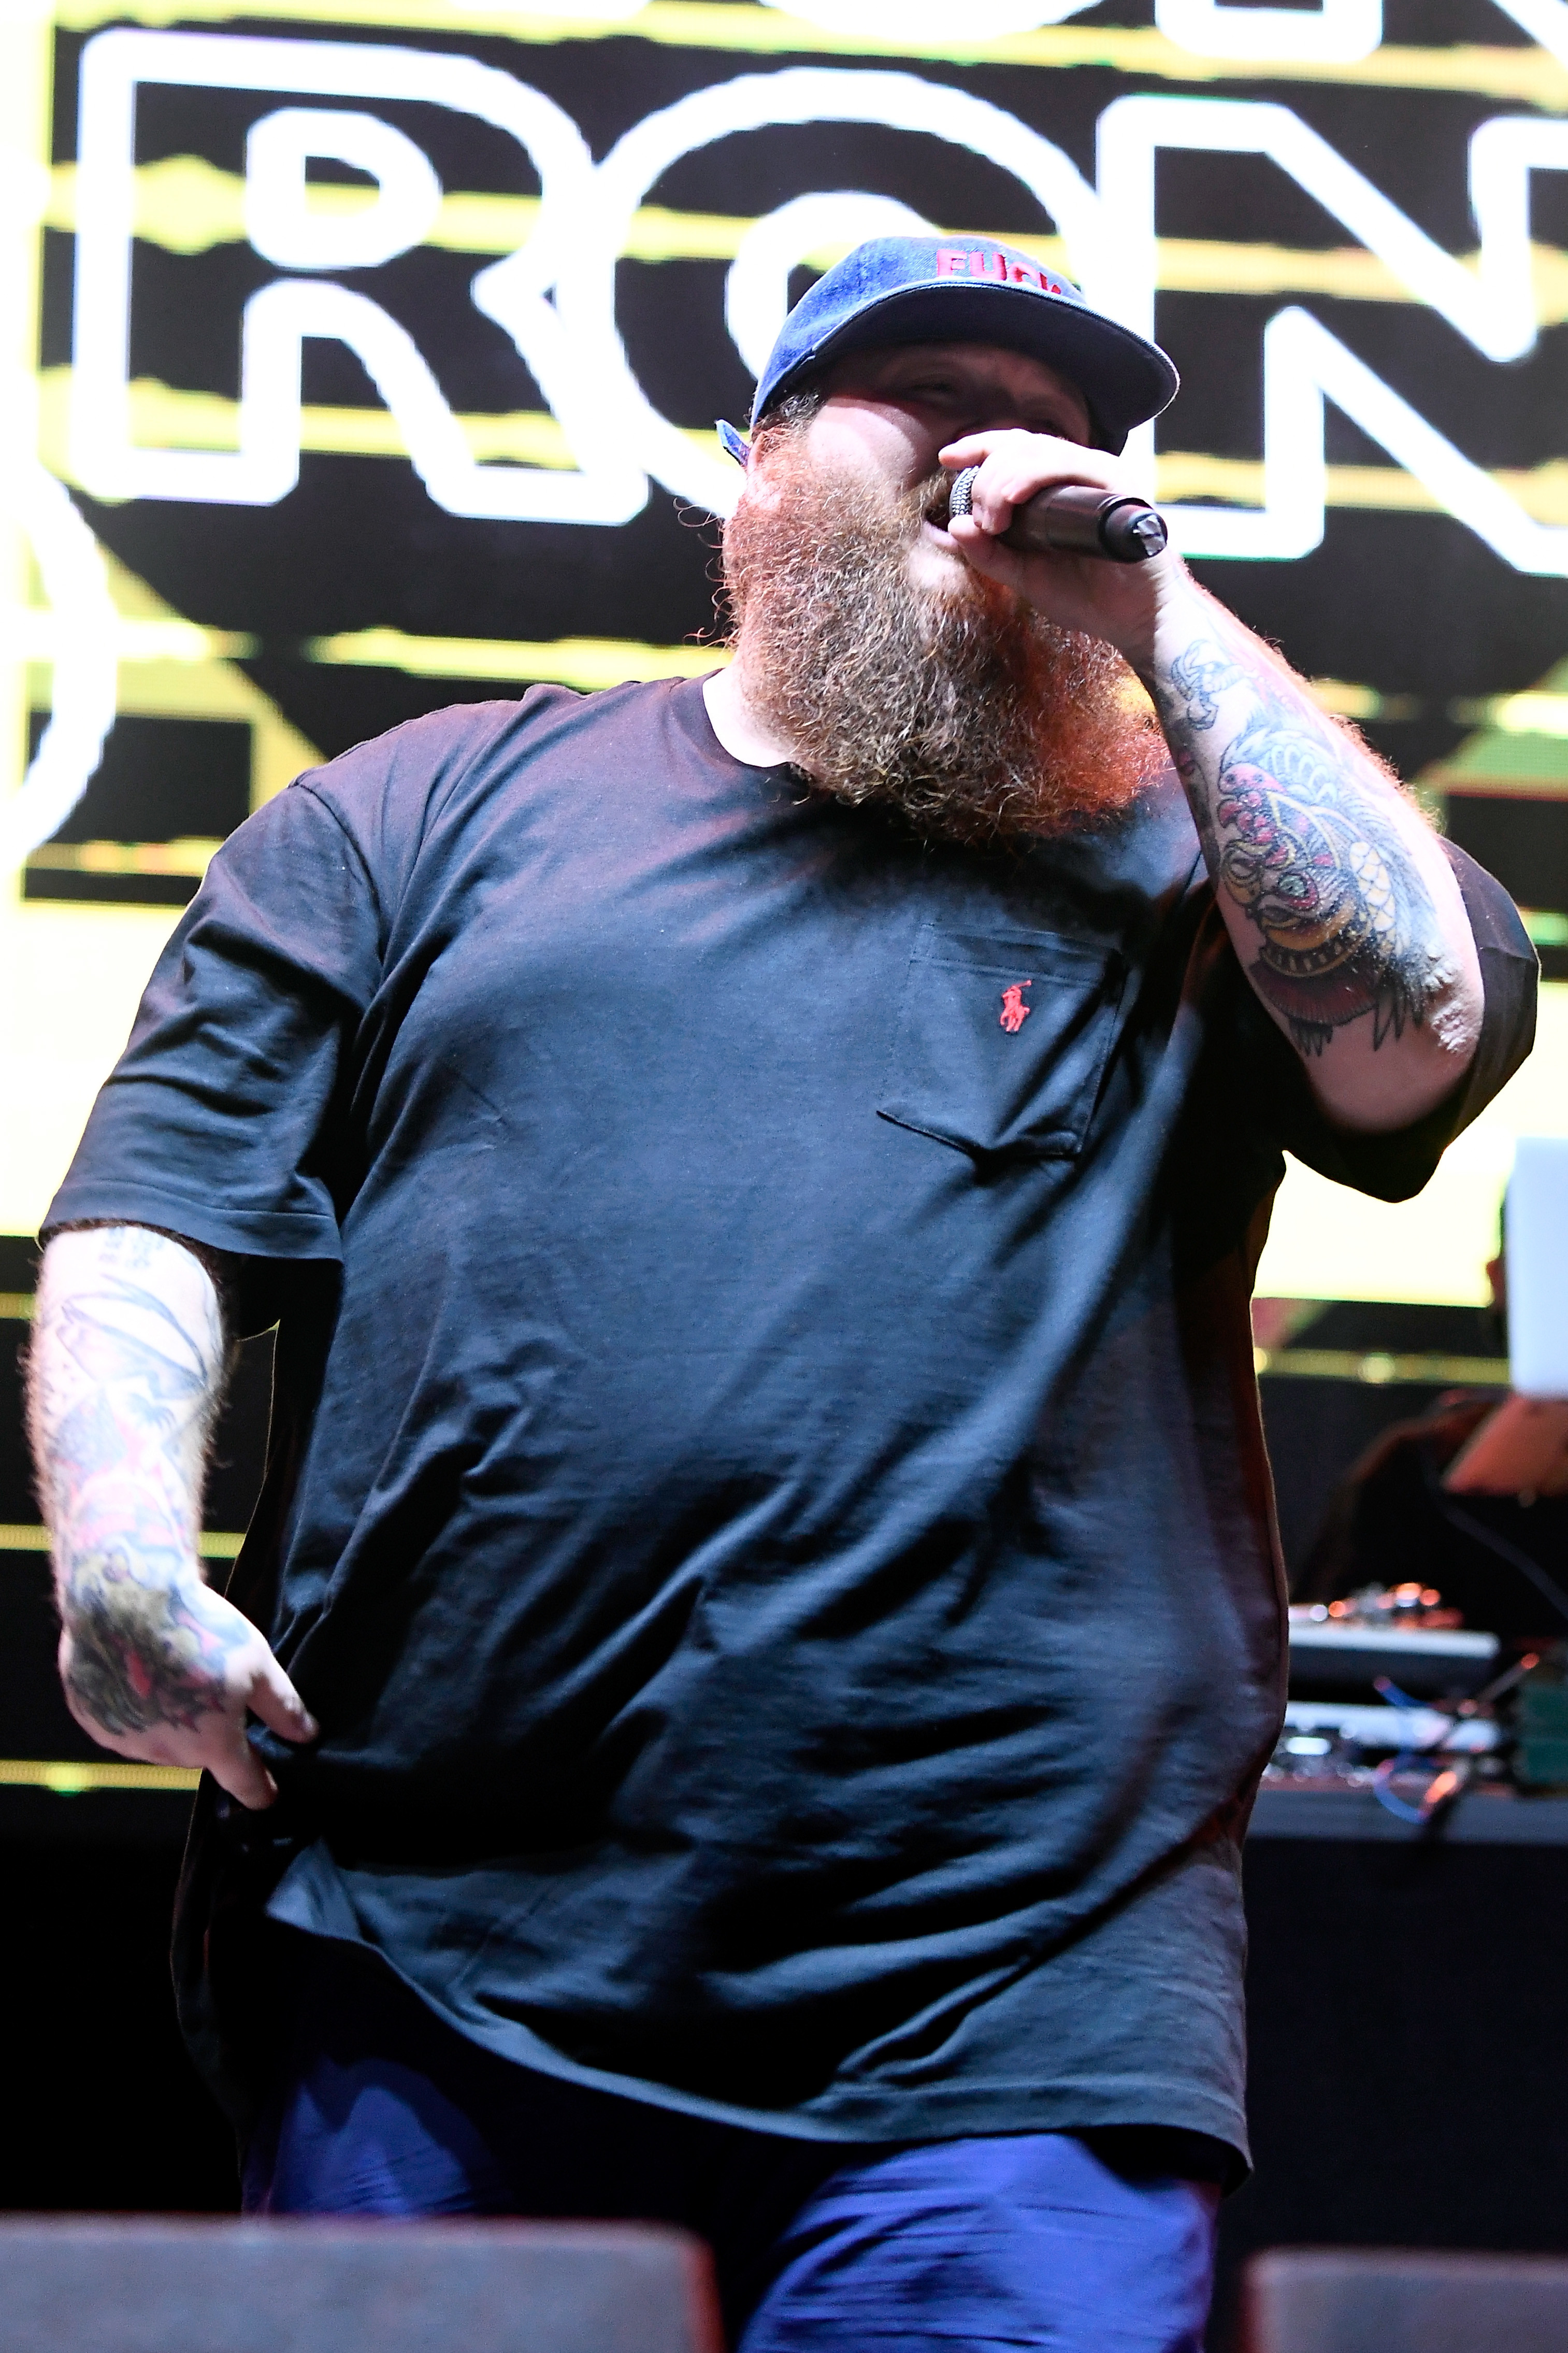 Samples Of The Week: March 26 (Action Bronson Edition)